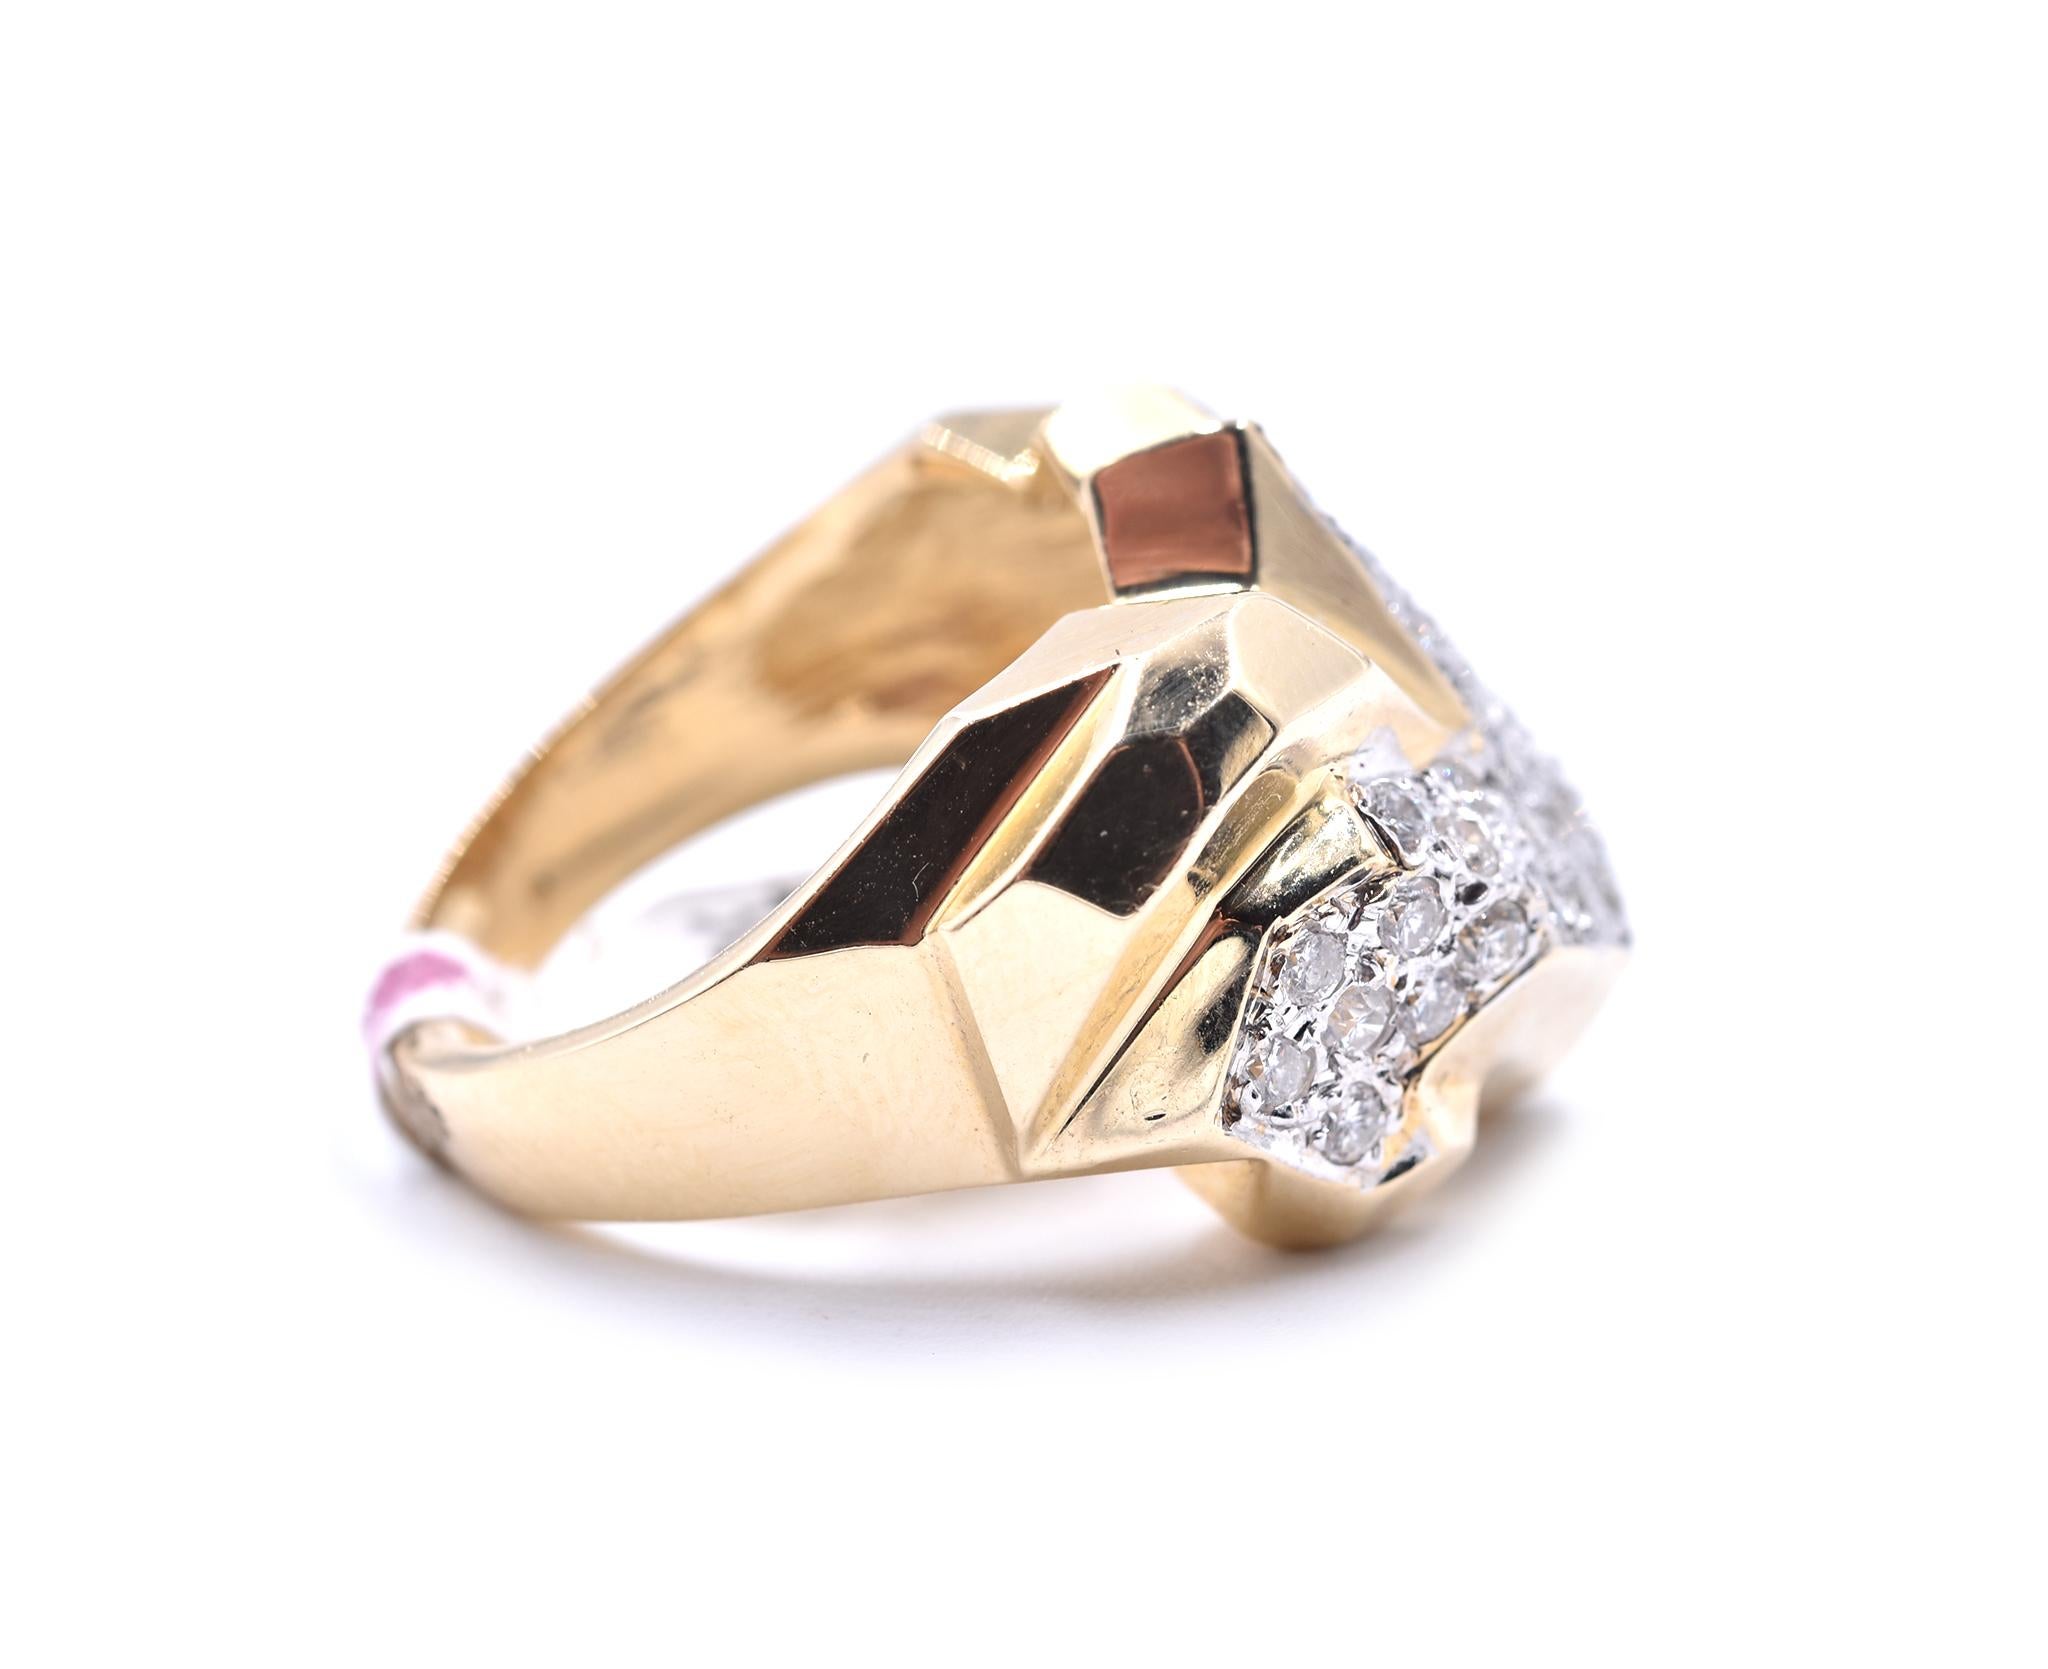 Designer: custom design
Material: 14k yellow gold
Diamonds: 36 round brilliant cut= 0.70cttw
Color: G
Clarity: VS
Ring size: 7 ¼ (please allow two additional shipping days for sizing requests)
Dimensions: ring is 18.61mm by 21.10mm 
Weight: 11.44